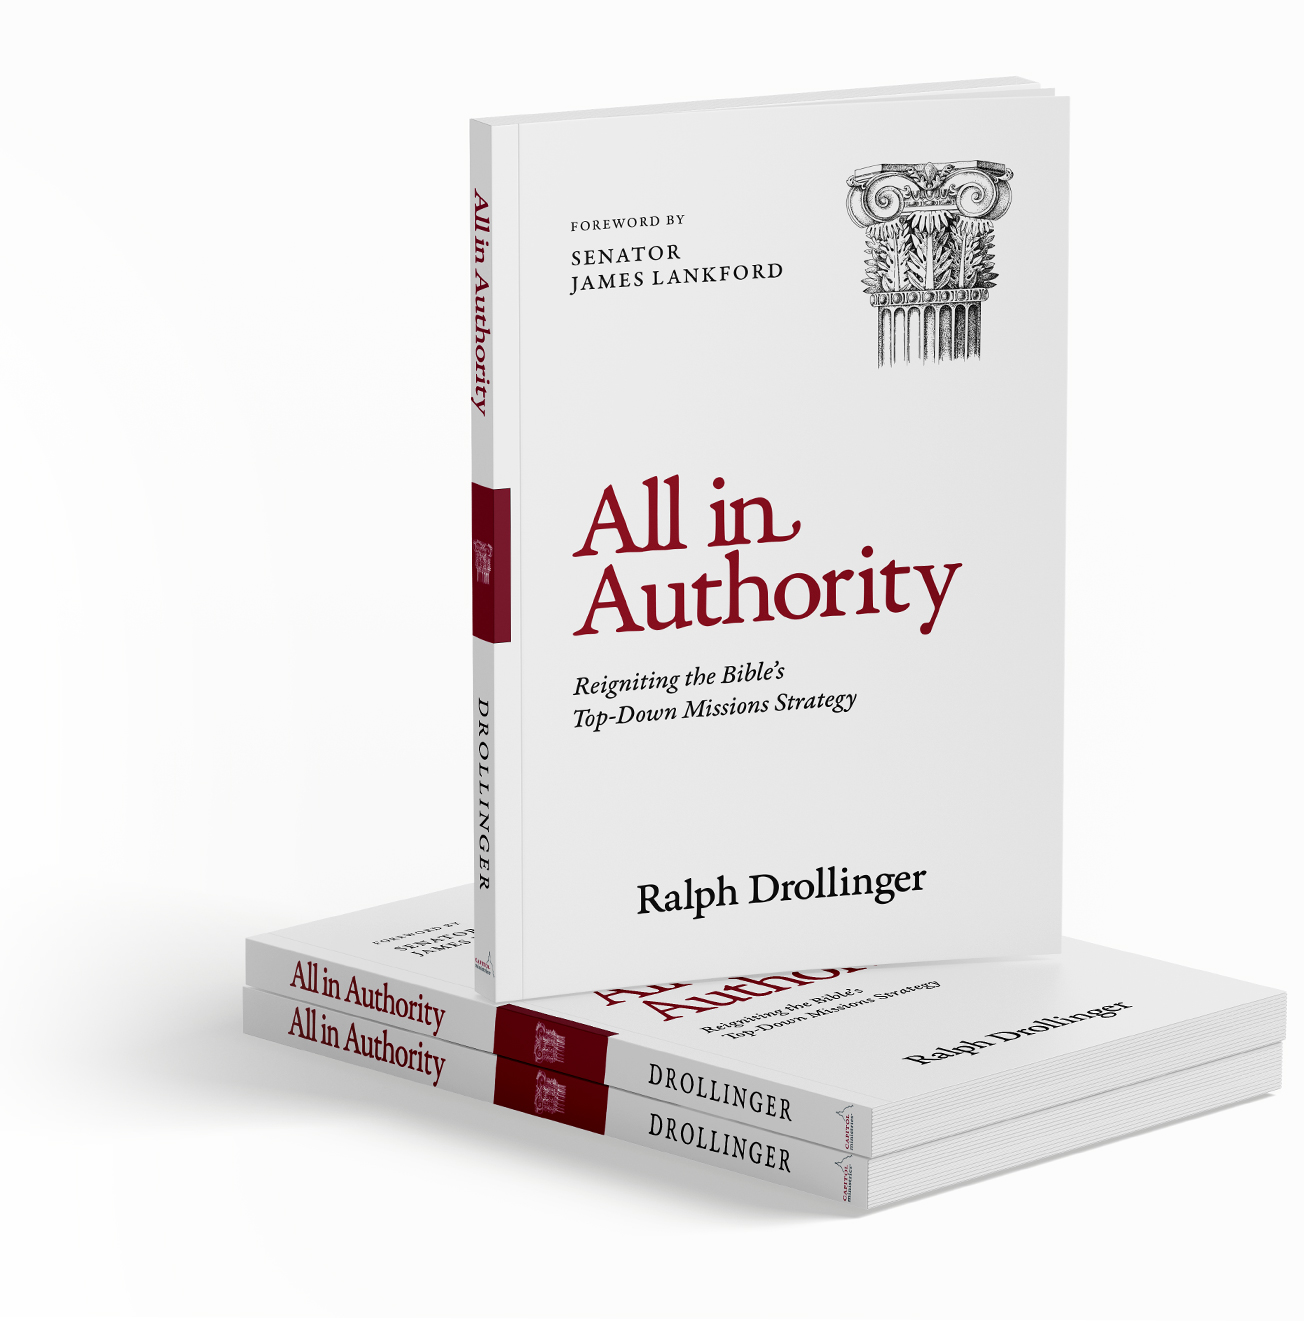 All in Authority by Ralph Drollinger